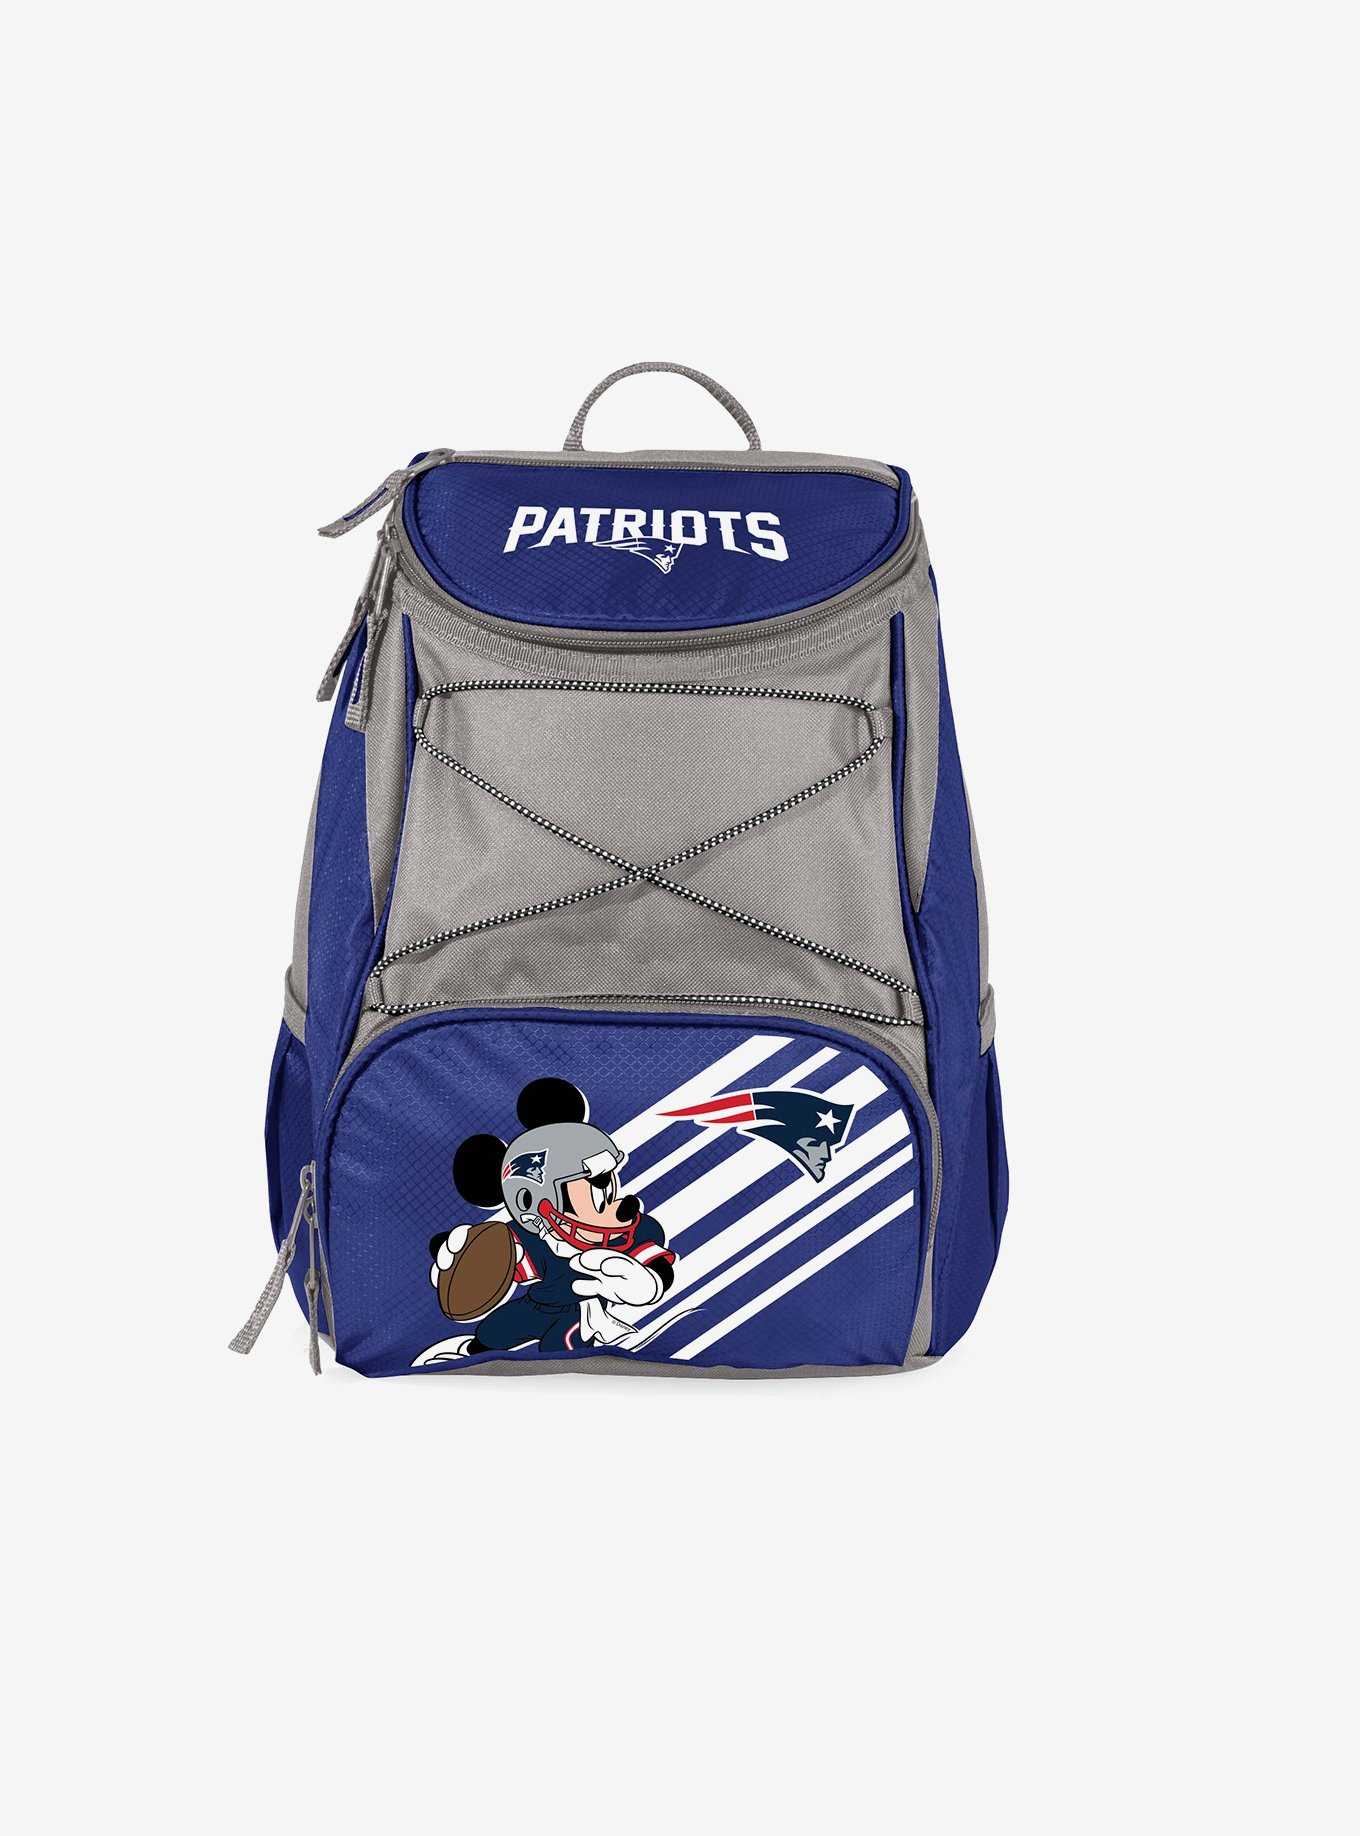 Disney Mickey Mouse NFL New England Patriots Cooler Backpack, , hi-res